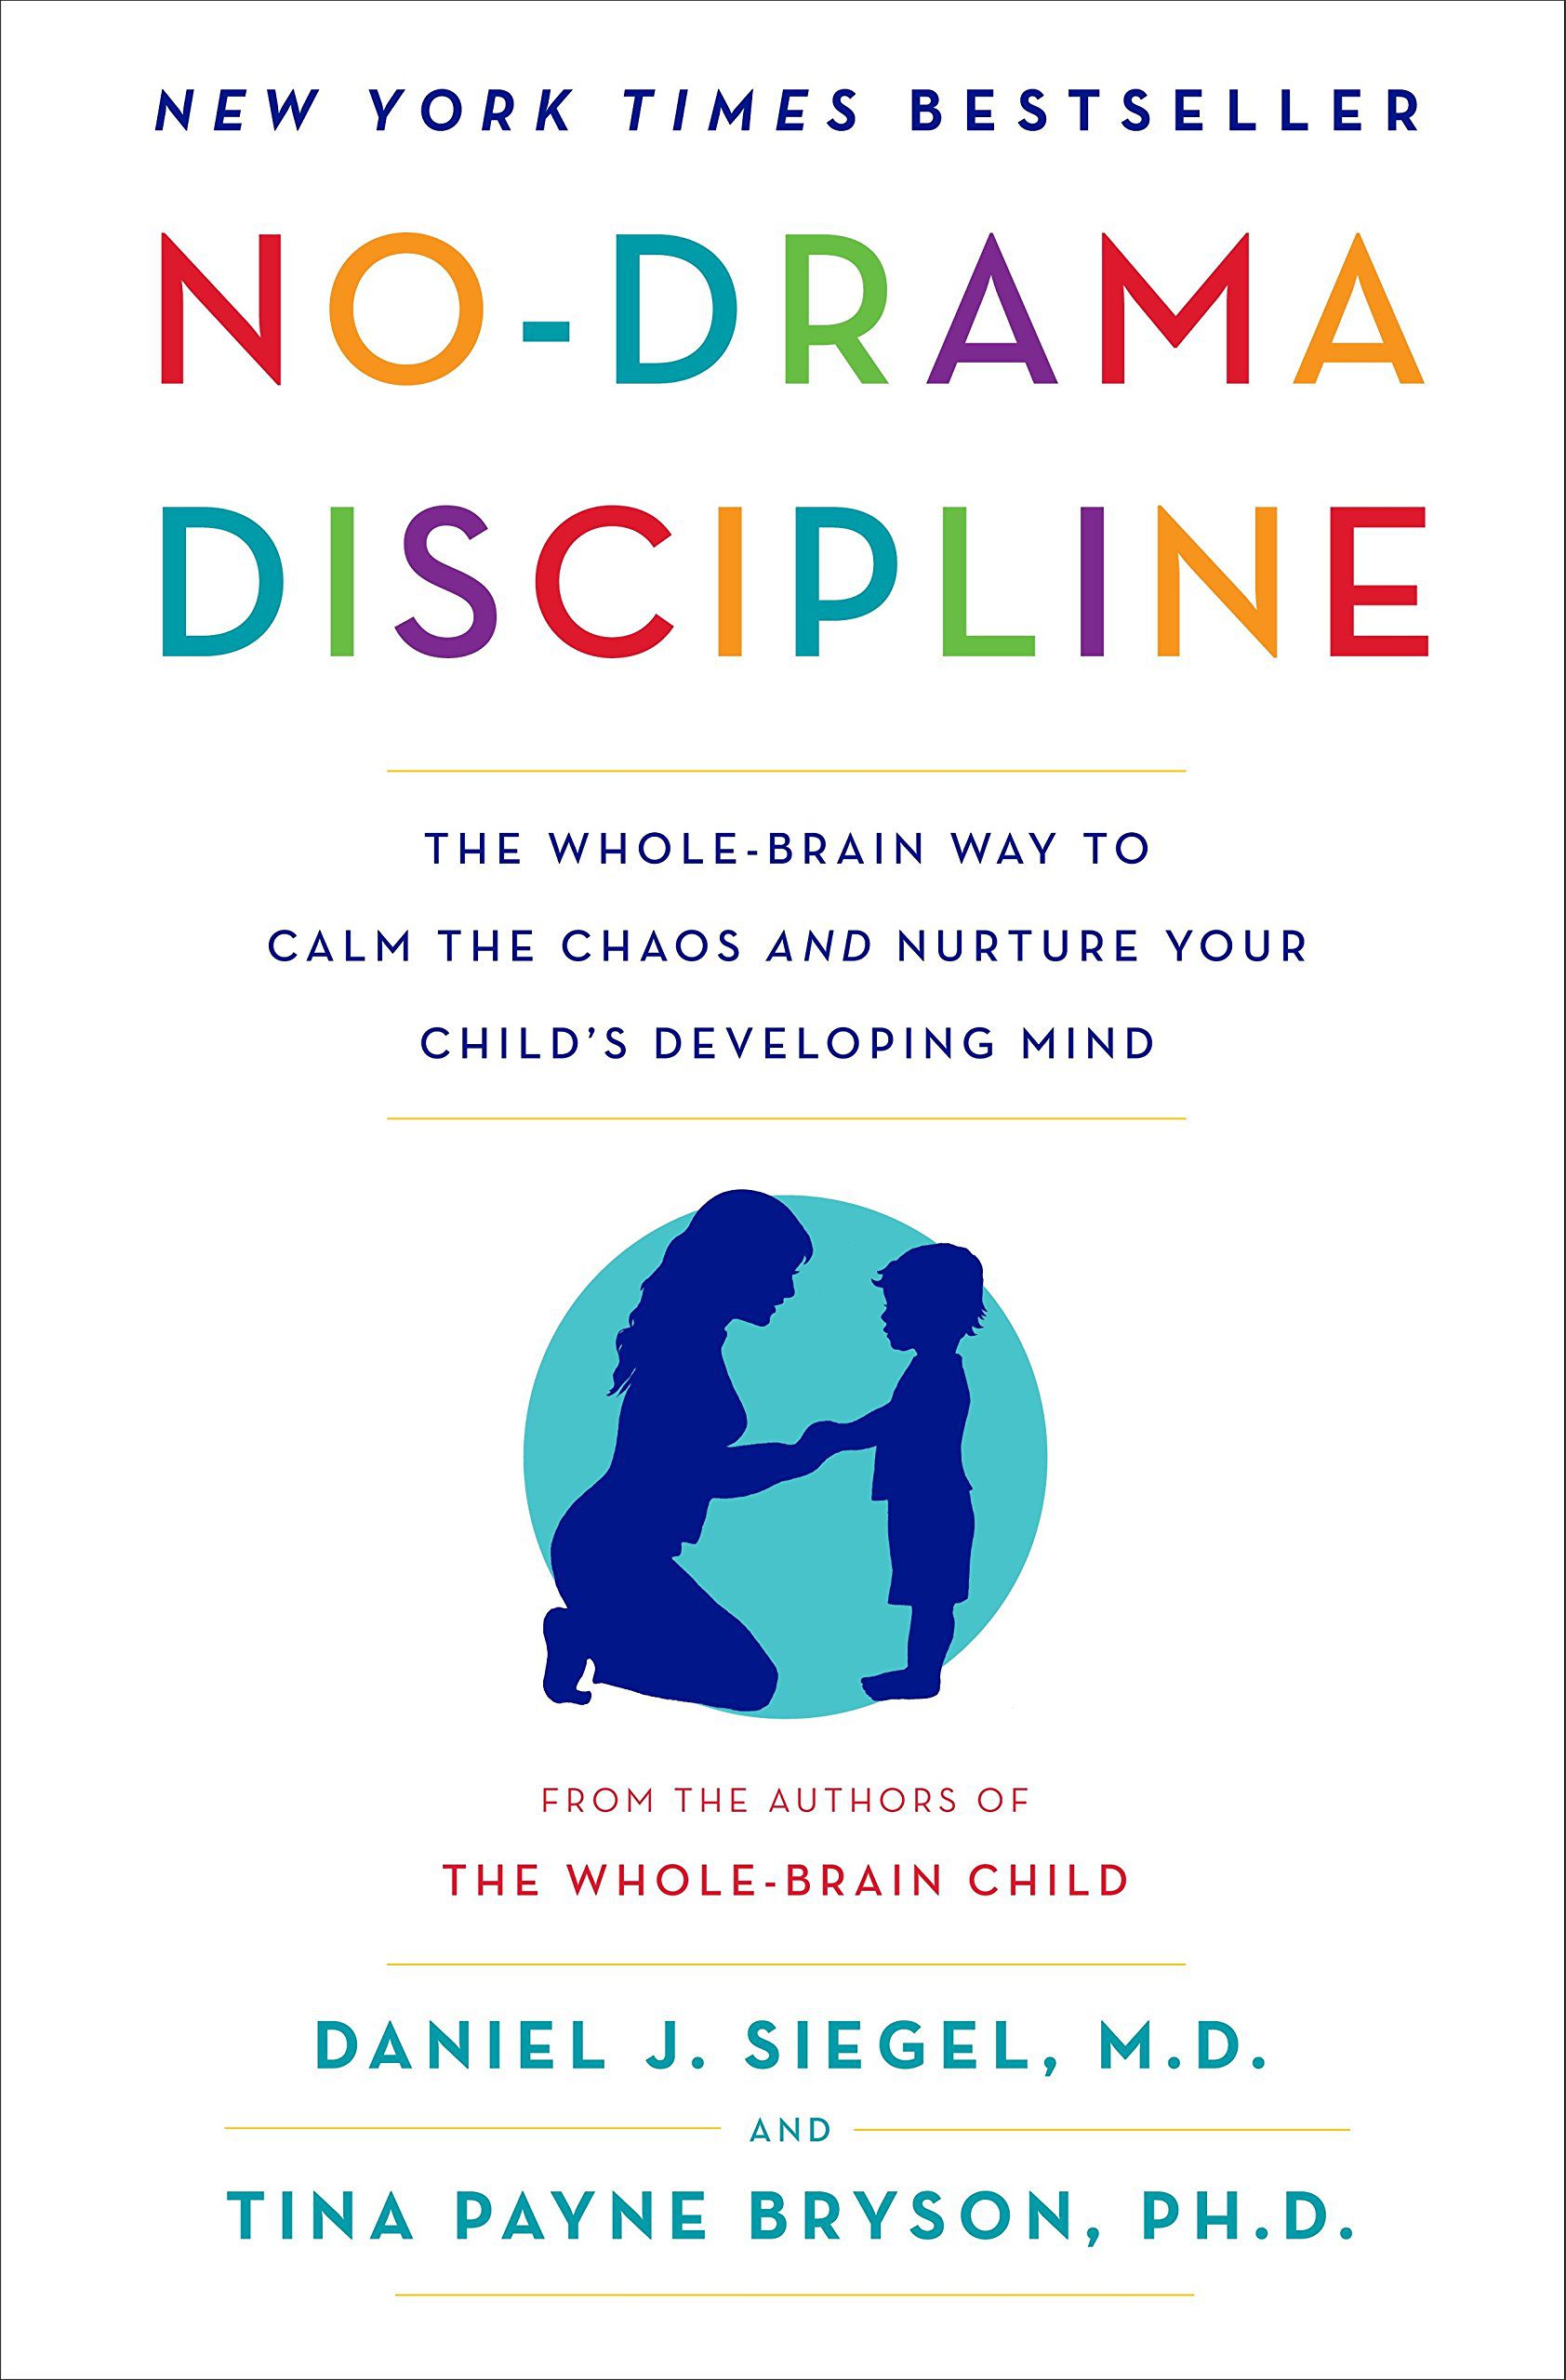 No-Drama Discipline- The Whole-Brain Way to Calm the Chaos and Nurture Your Child's Developing Mind